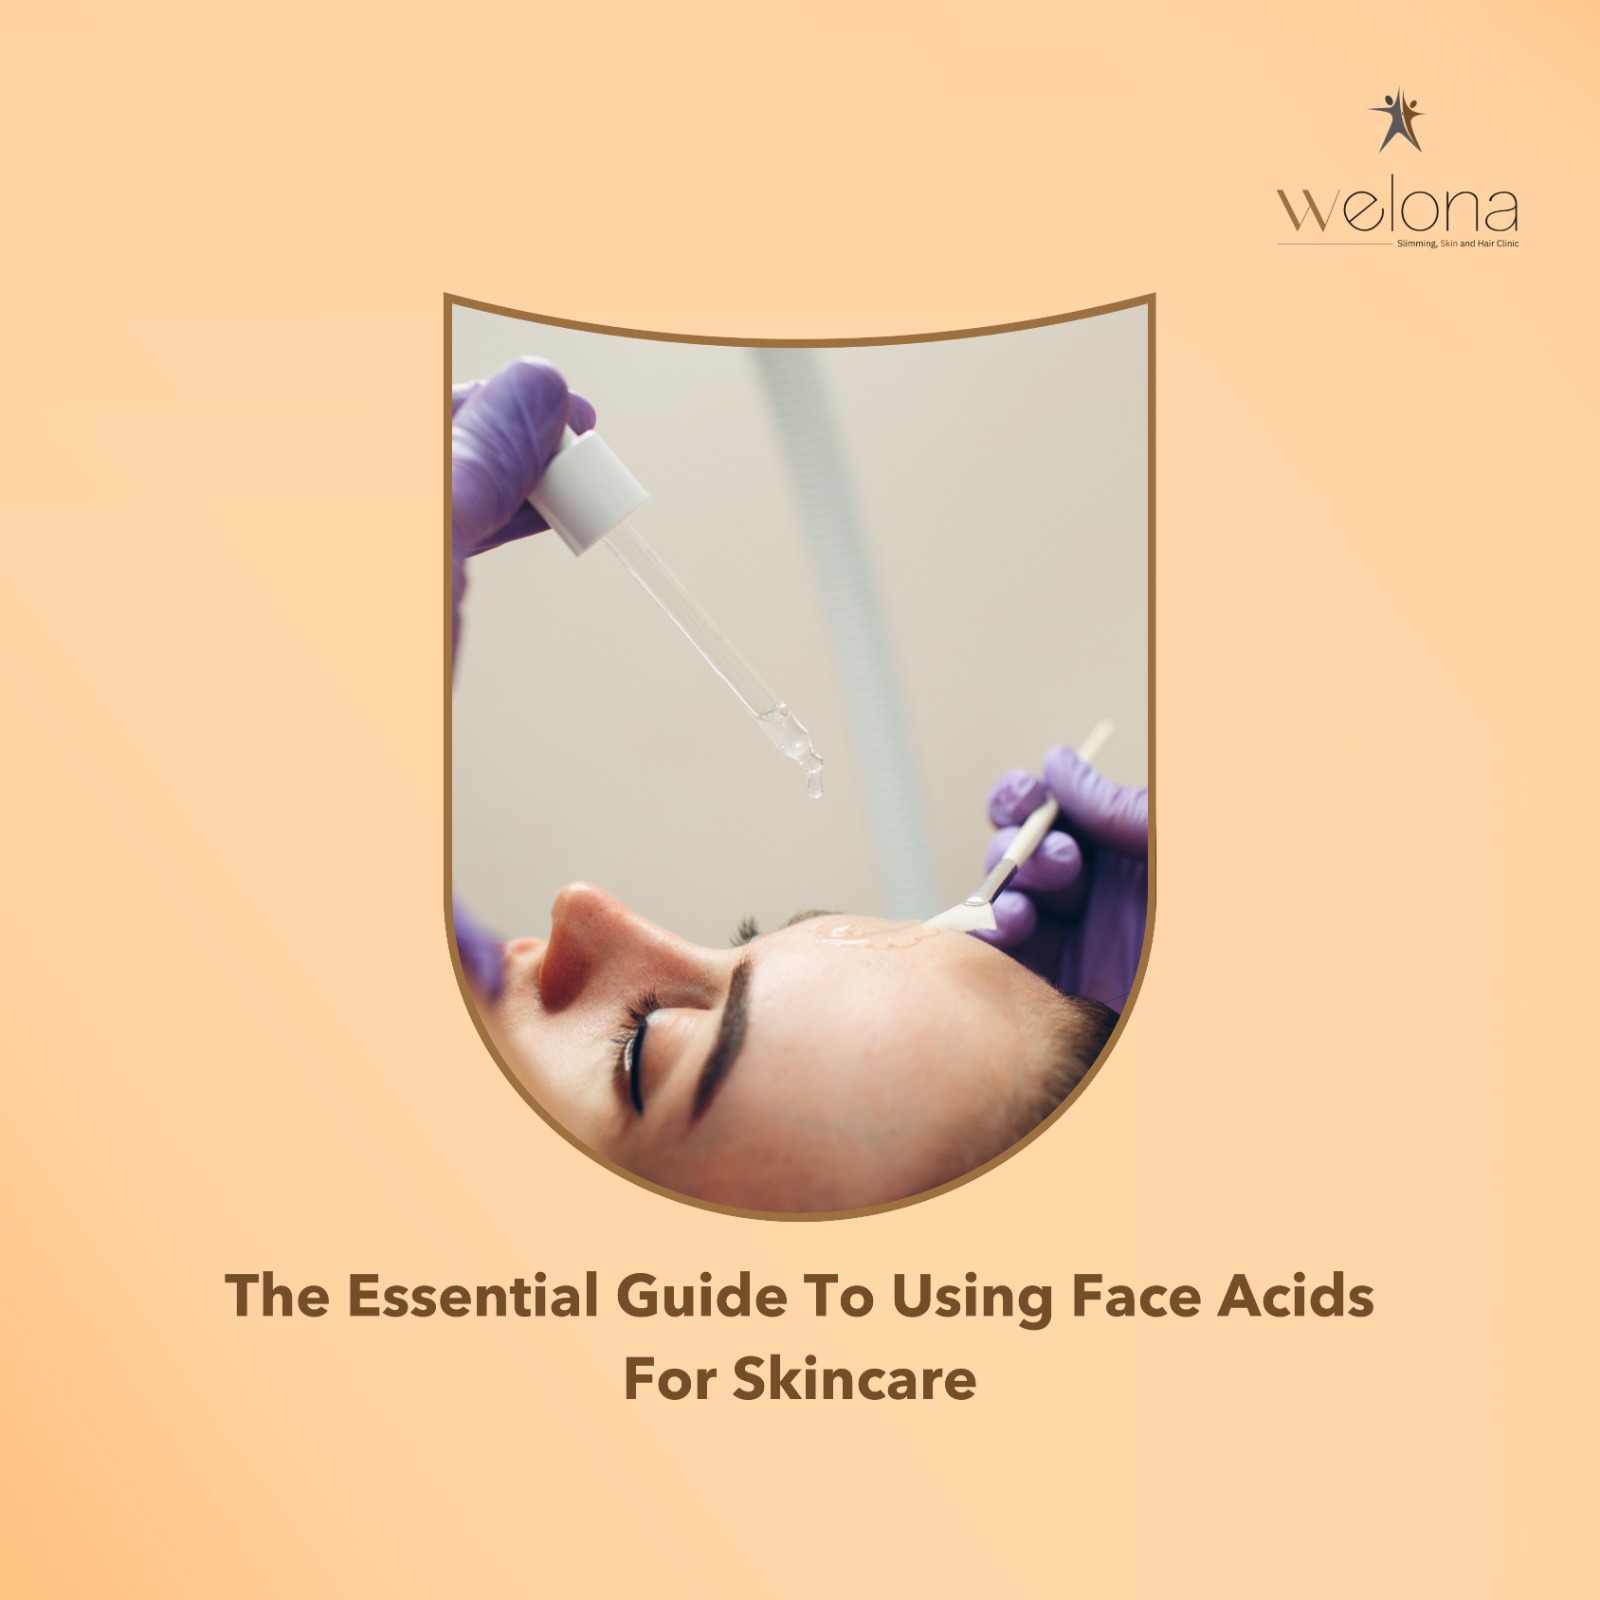 The Essential Guide To Using Face Acids For Skincare